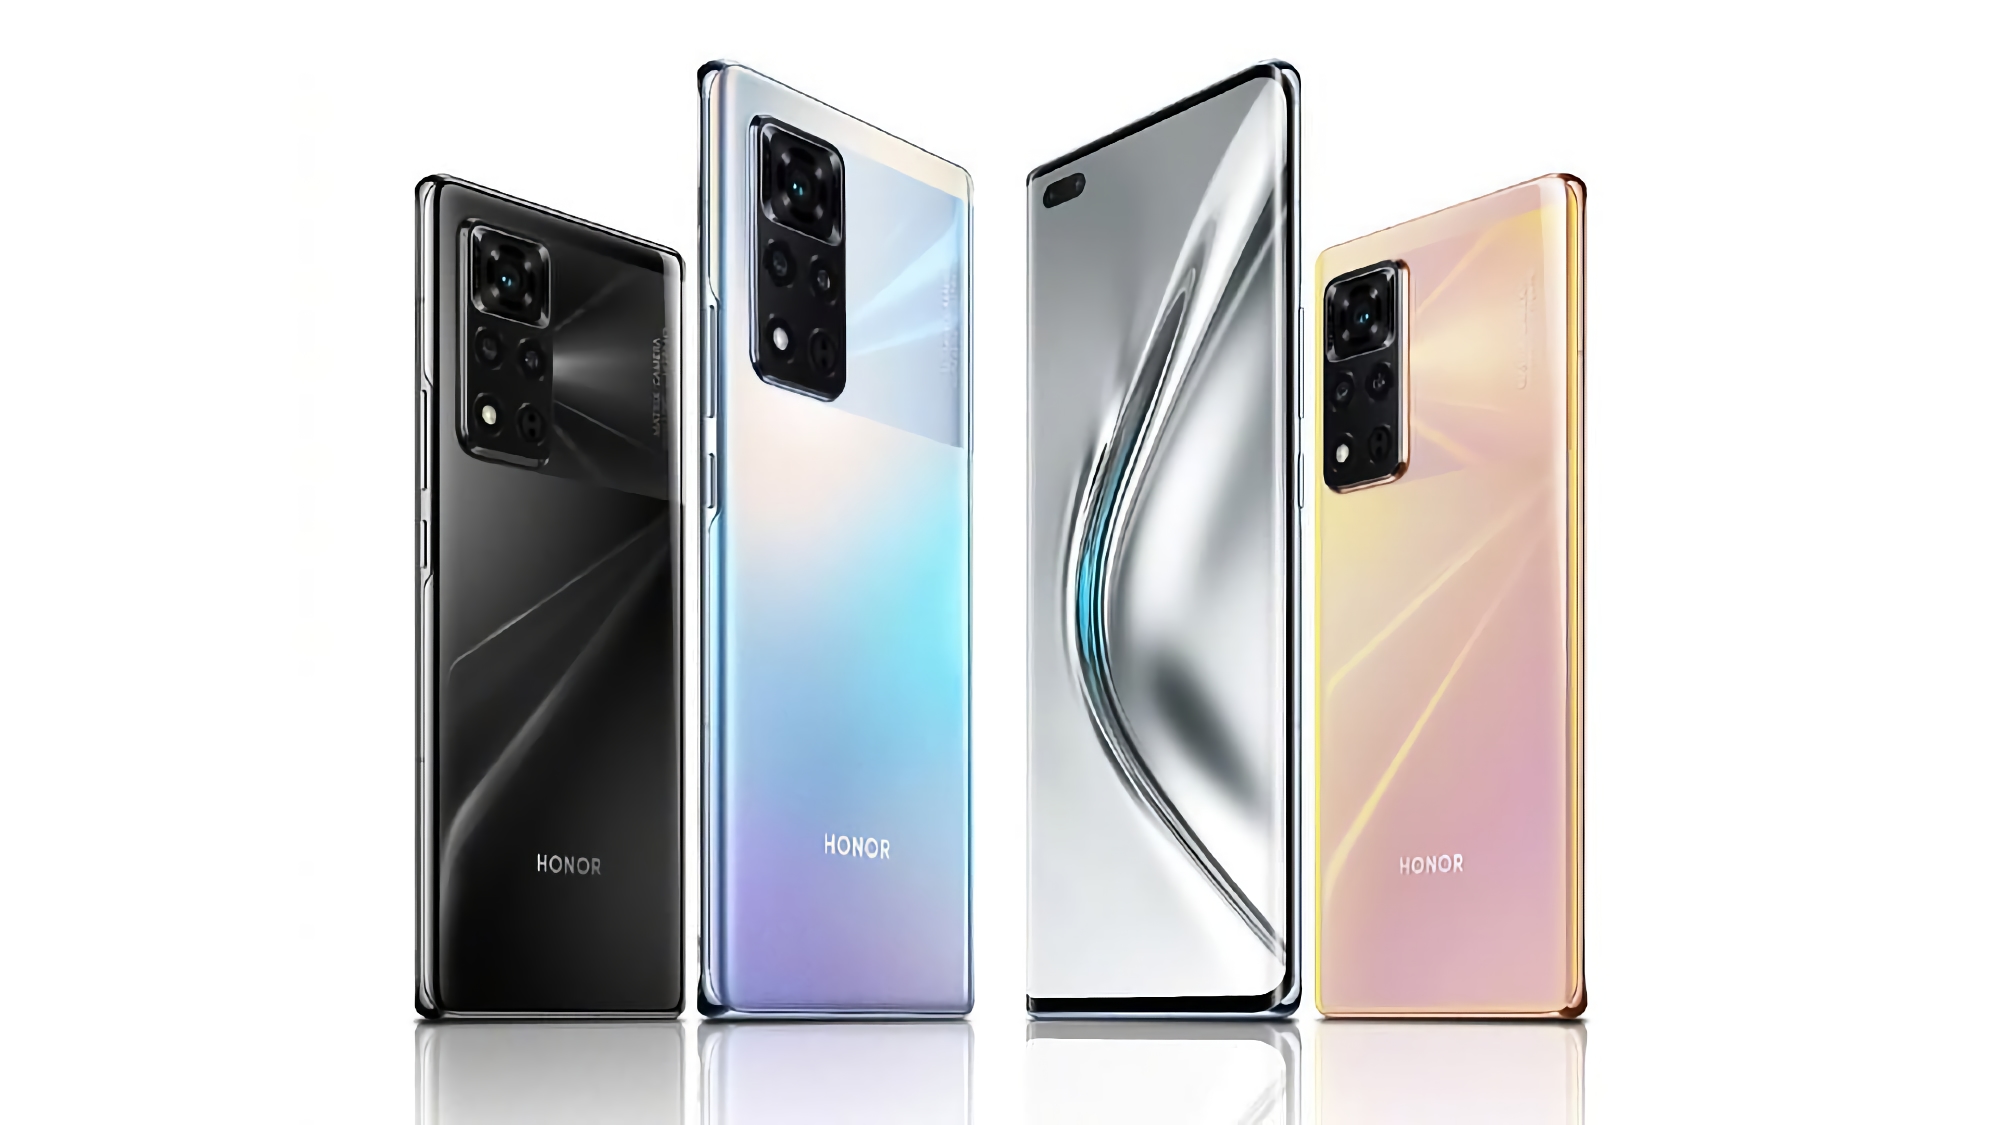 Honor V40 now has a new launch date and it's January 22